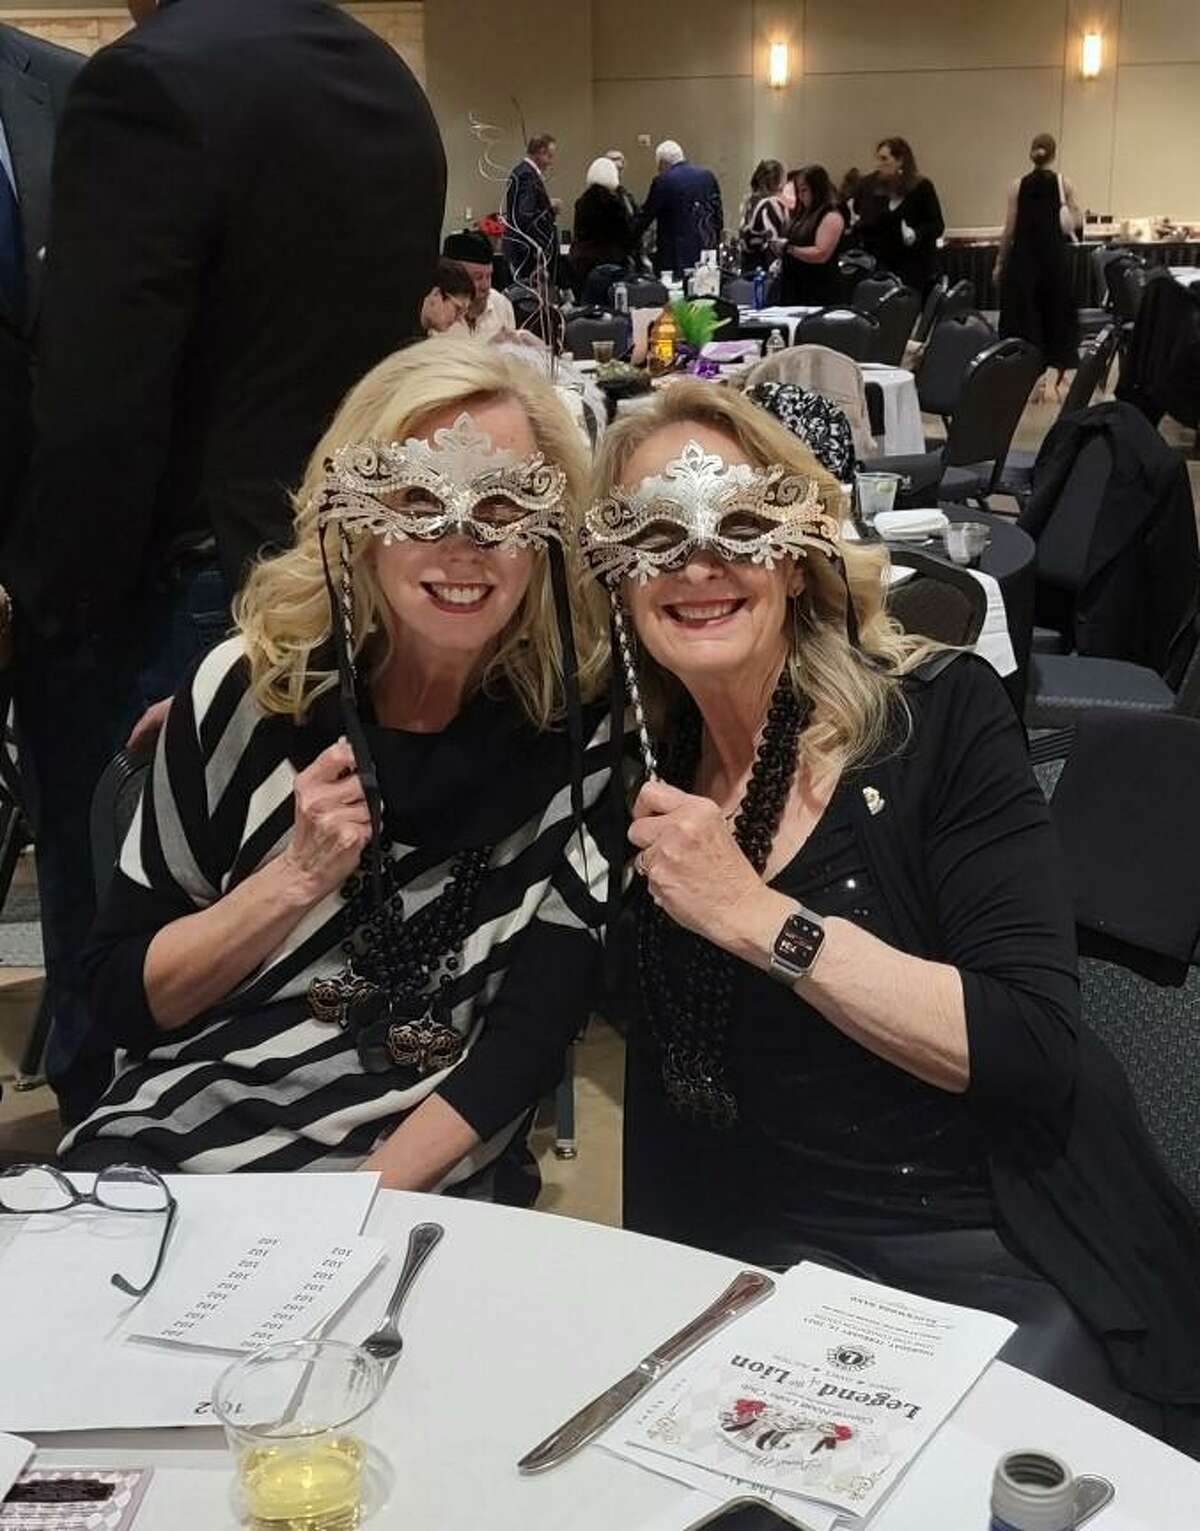 It’s a Masquerade - As Lions club members and sisters Junette Mihelich (l) and Helen Thornton (r) show off their mask at the Conroe Noon Lions Club annual Legend of the Lion - Dinner/Dance & Auction last week.